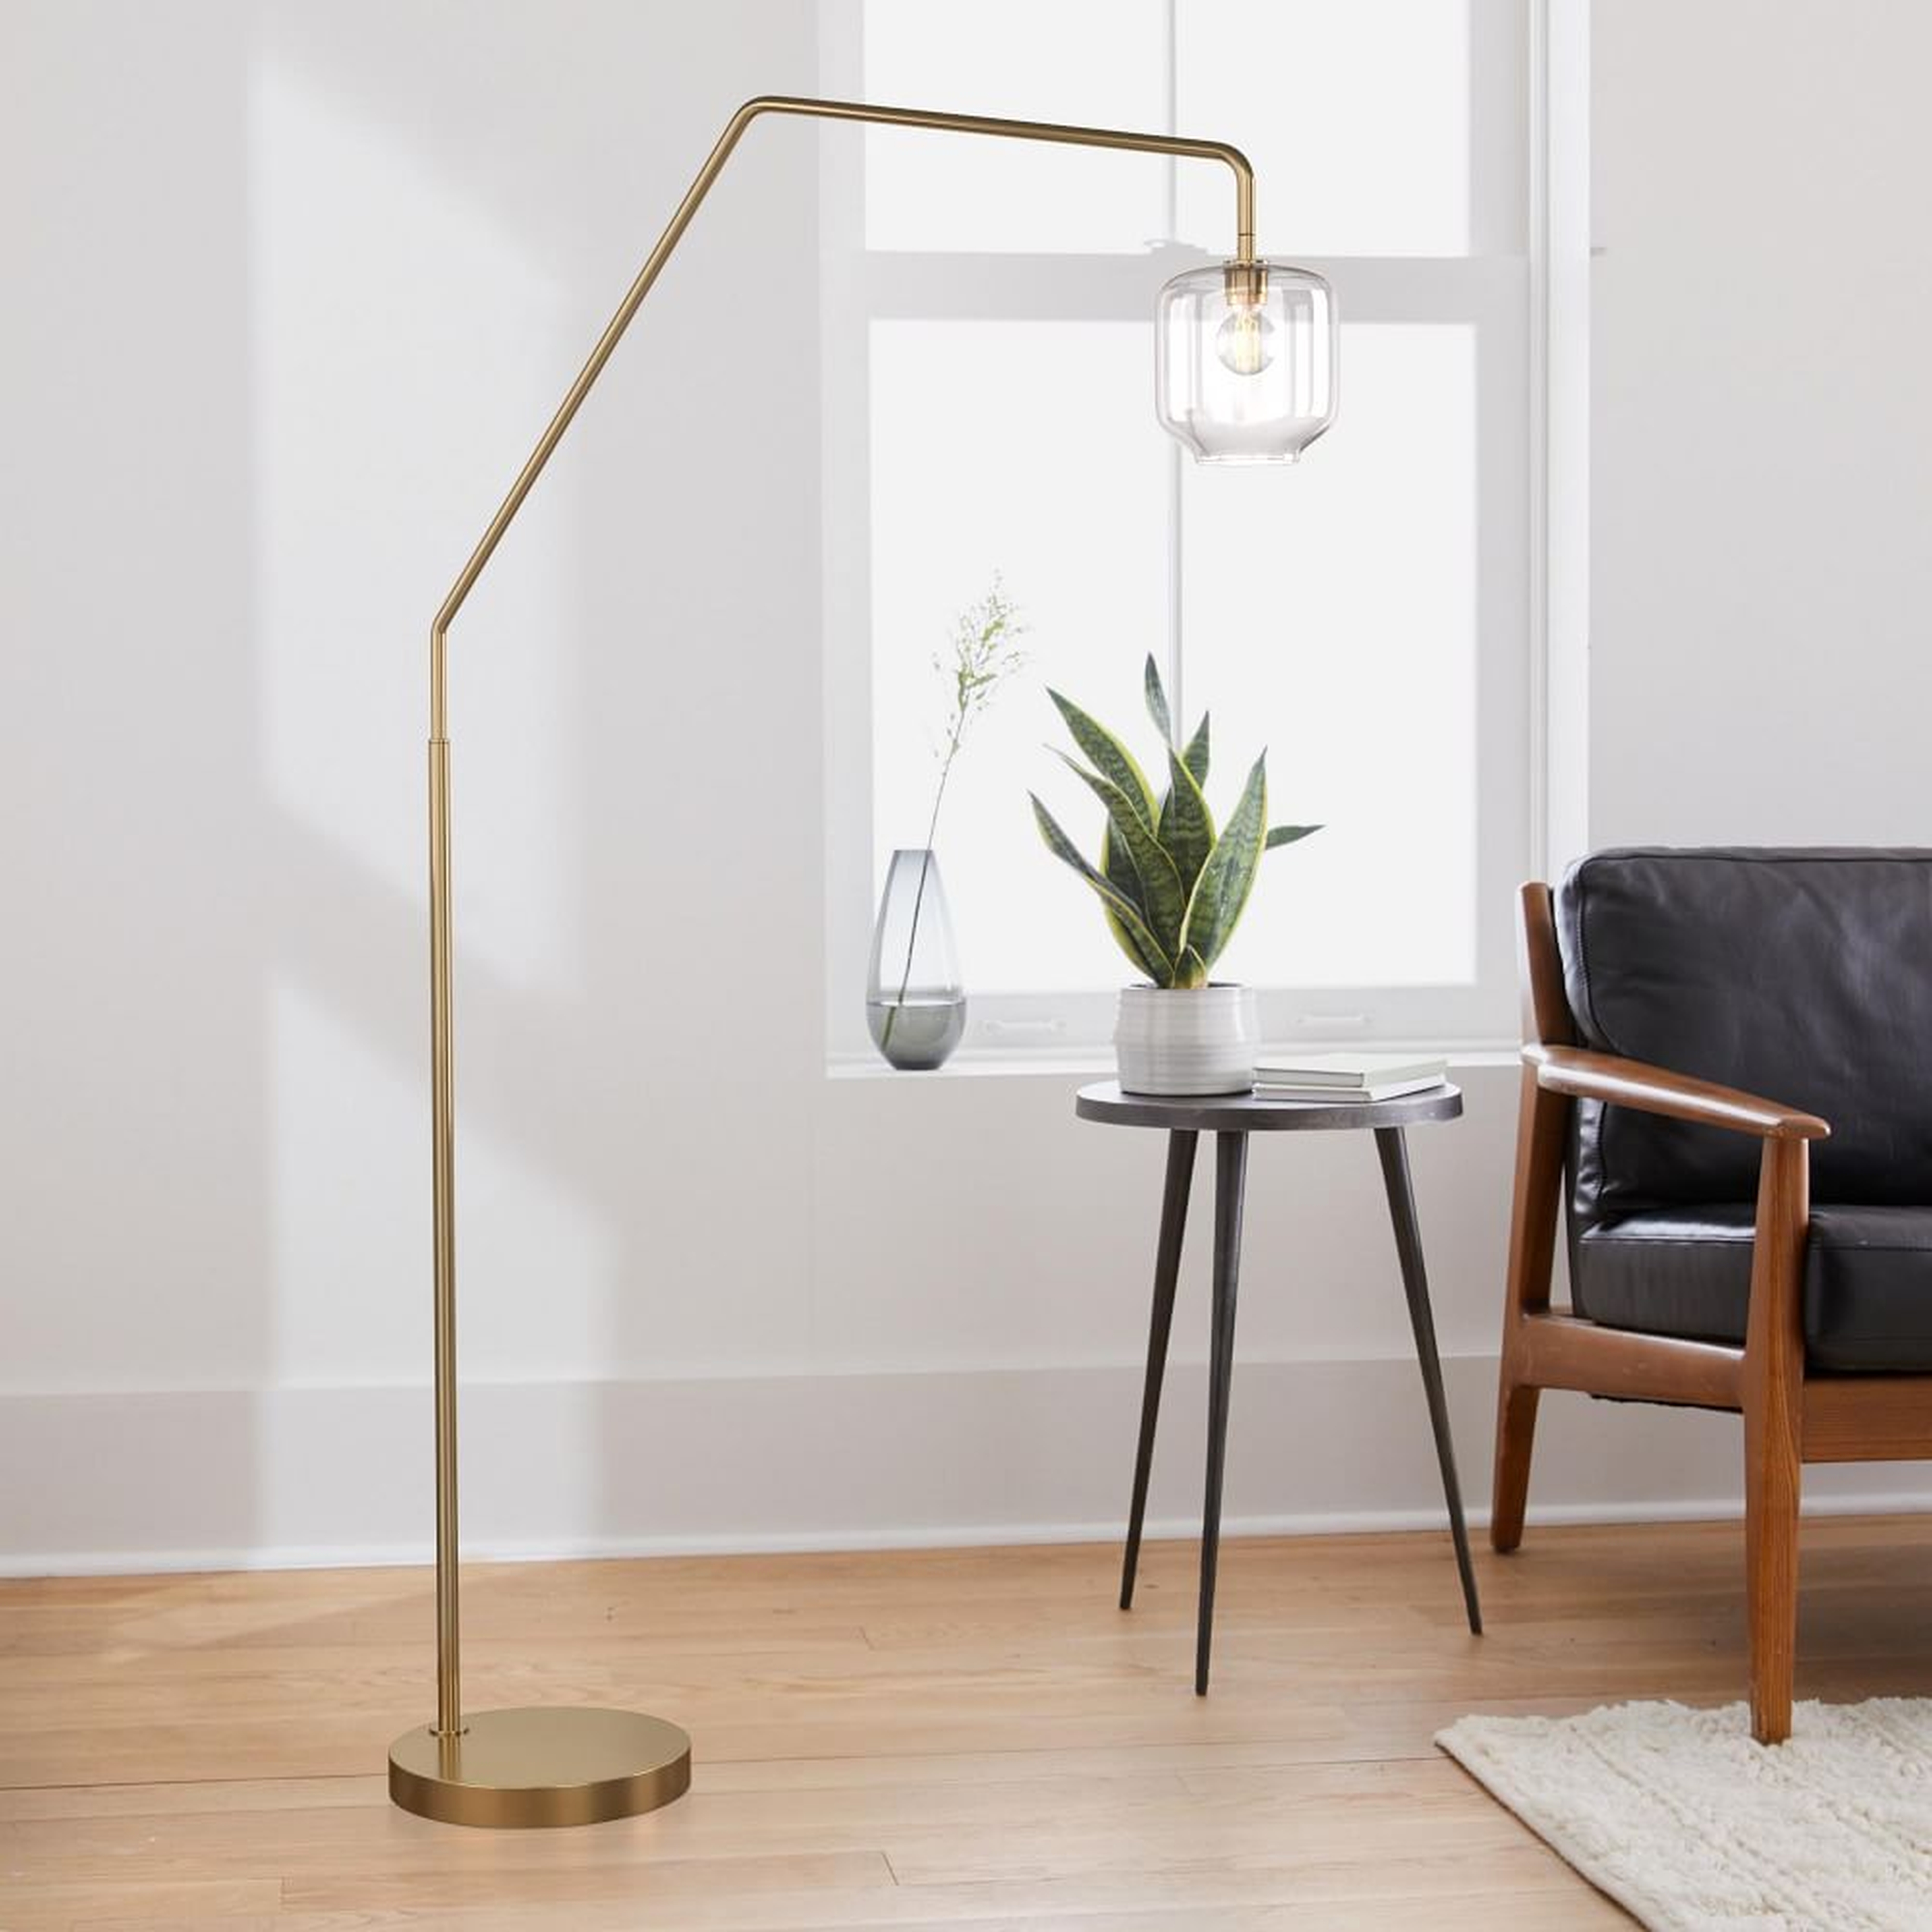 Sculptural Overarching Floor Lamp Antique Brass Clear Glass Pebble (75") - West Elm